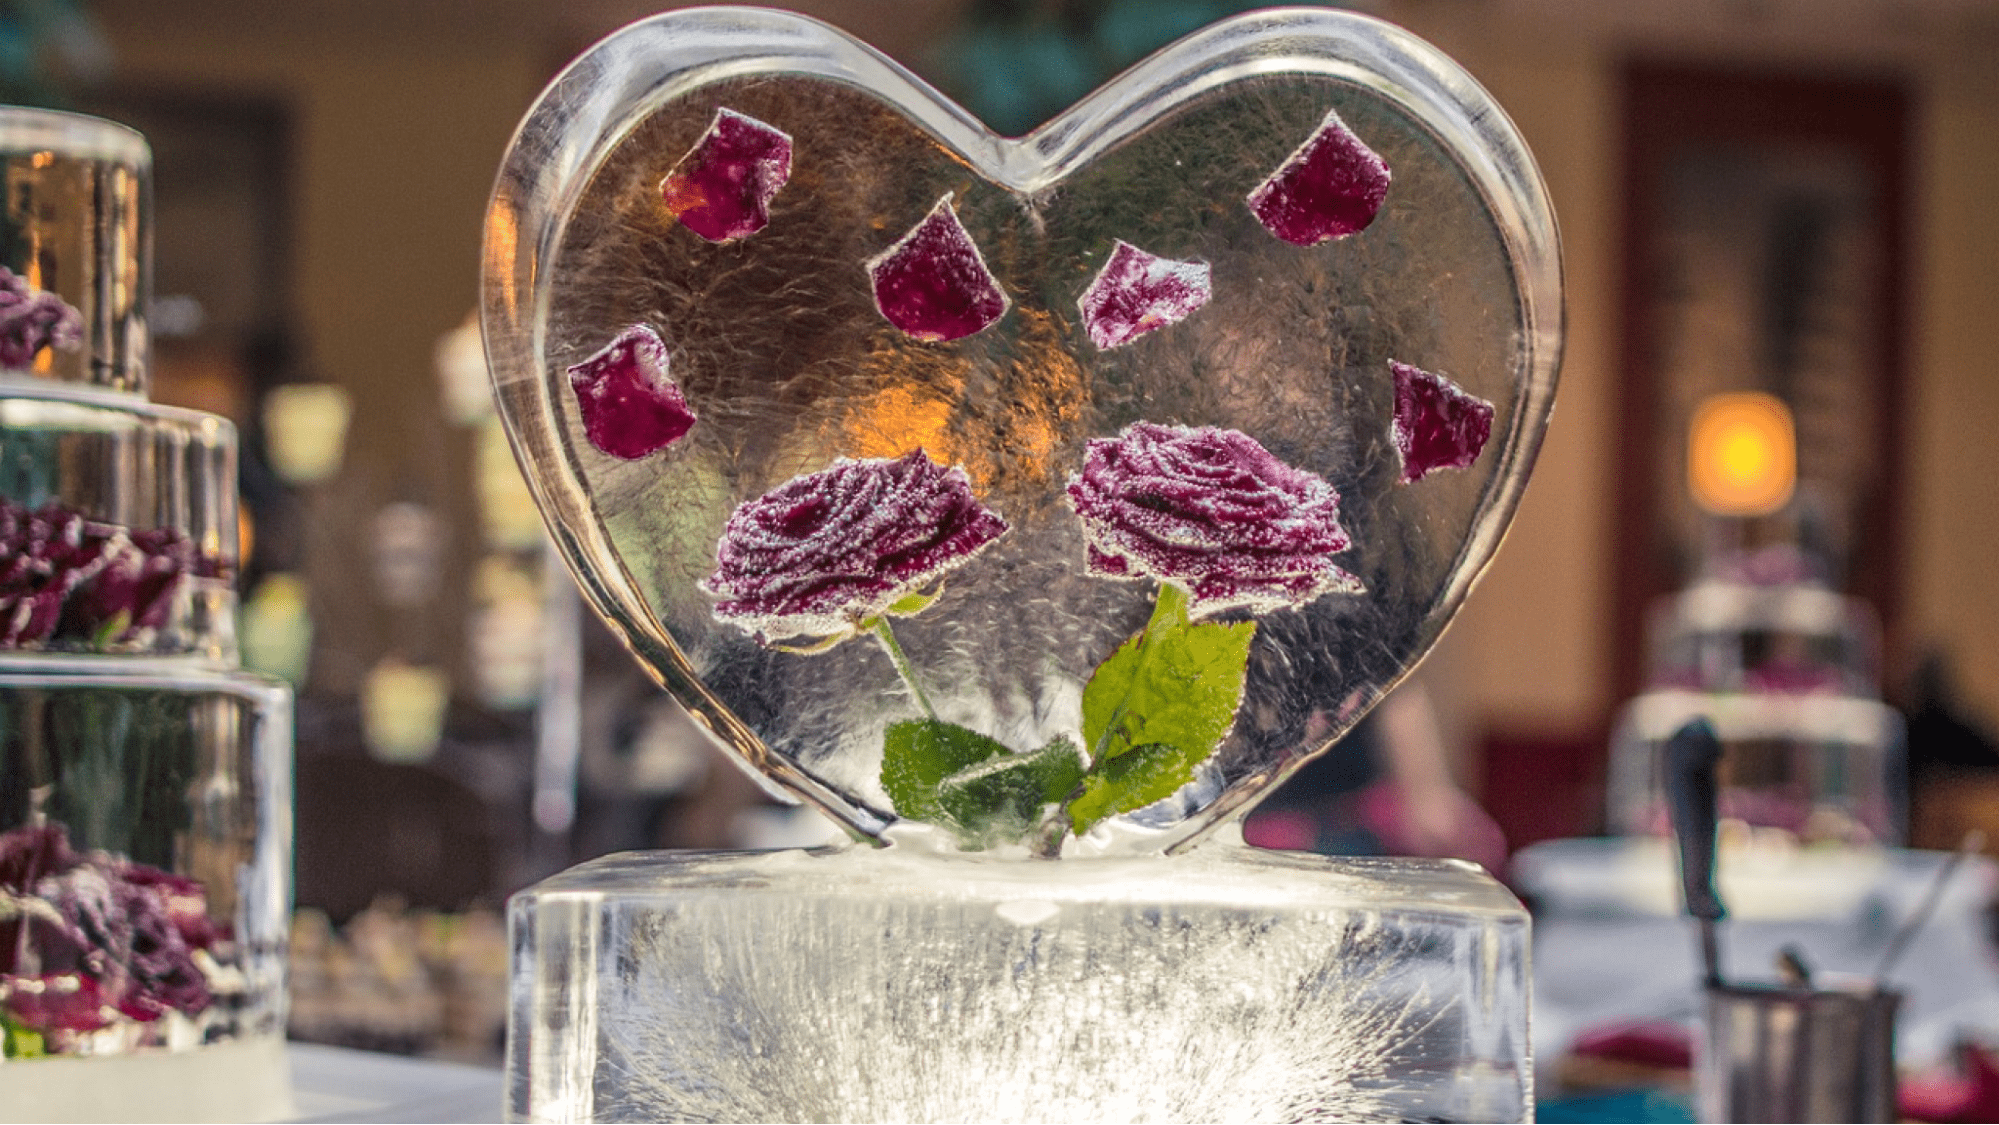 Heart-shaped ice sculpture on table